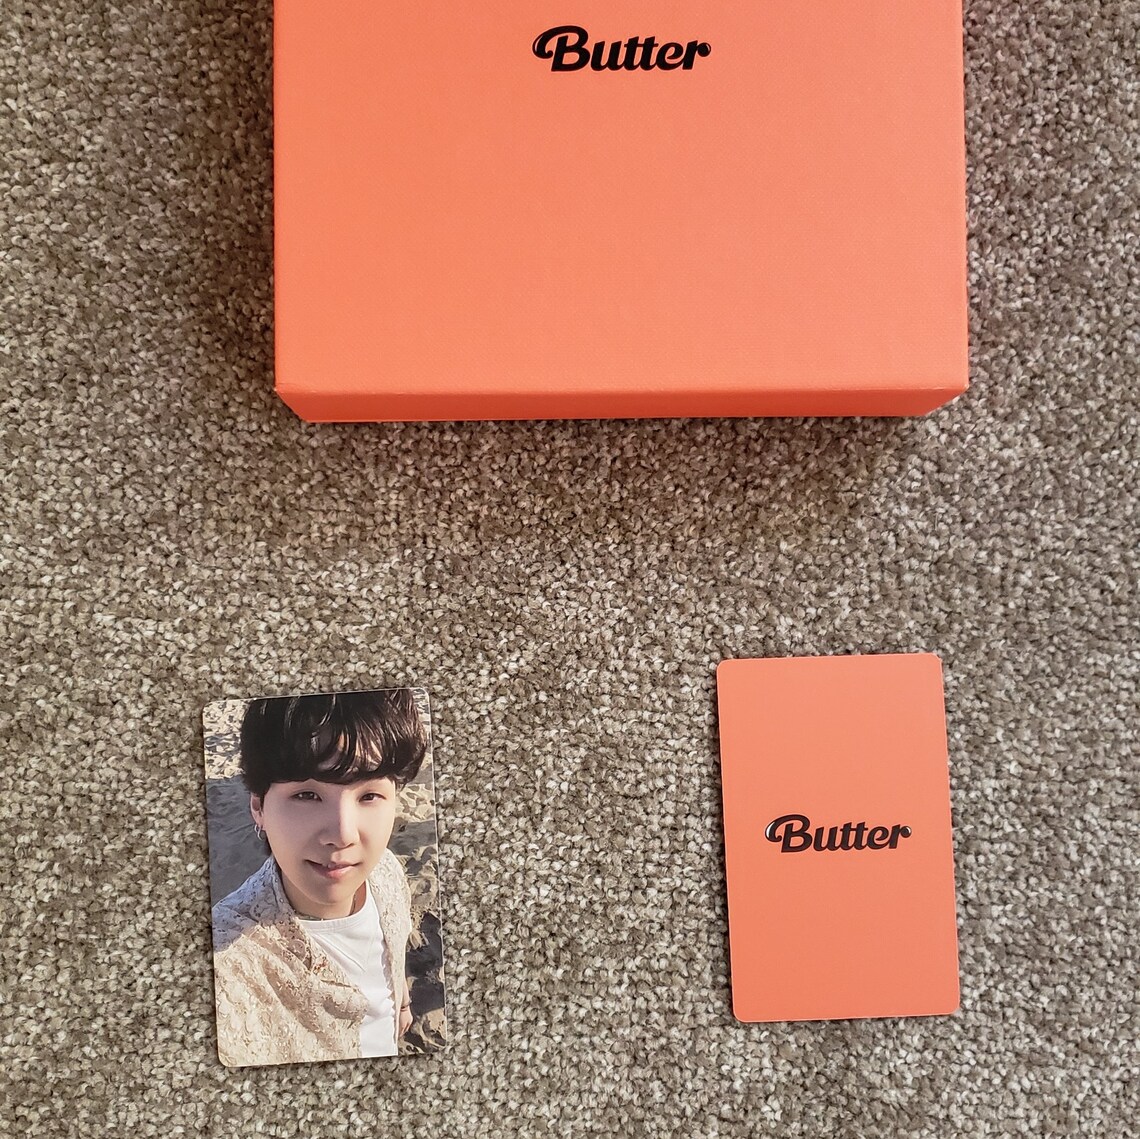 BTS OFFICIAL Album Photocards Butter | Etsy